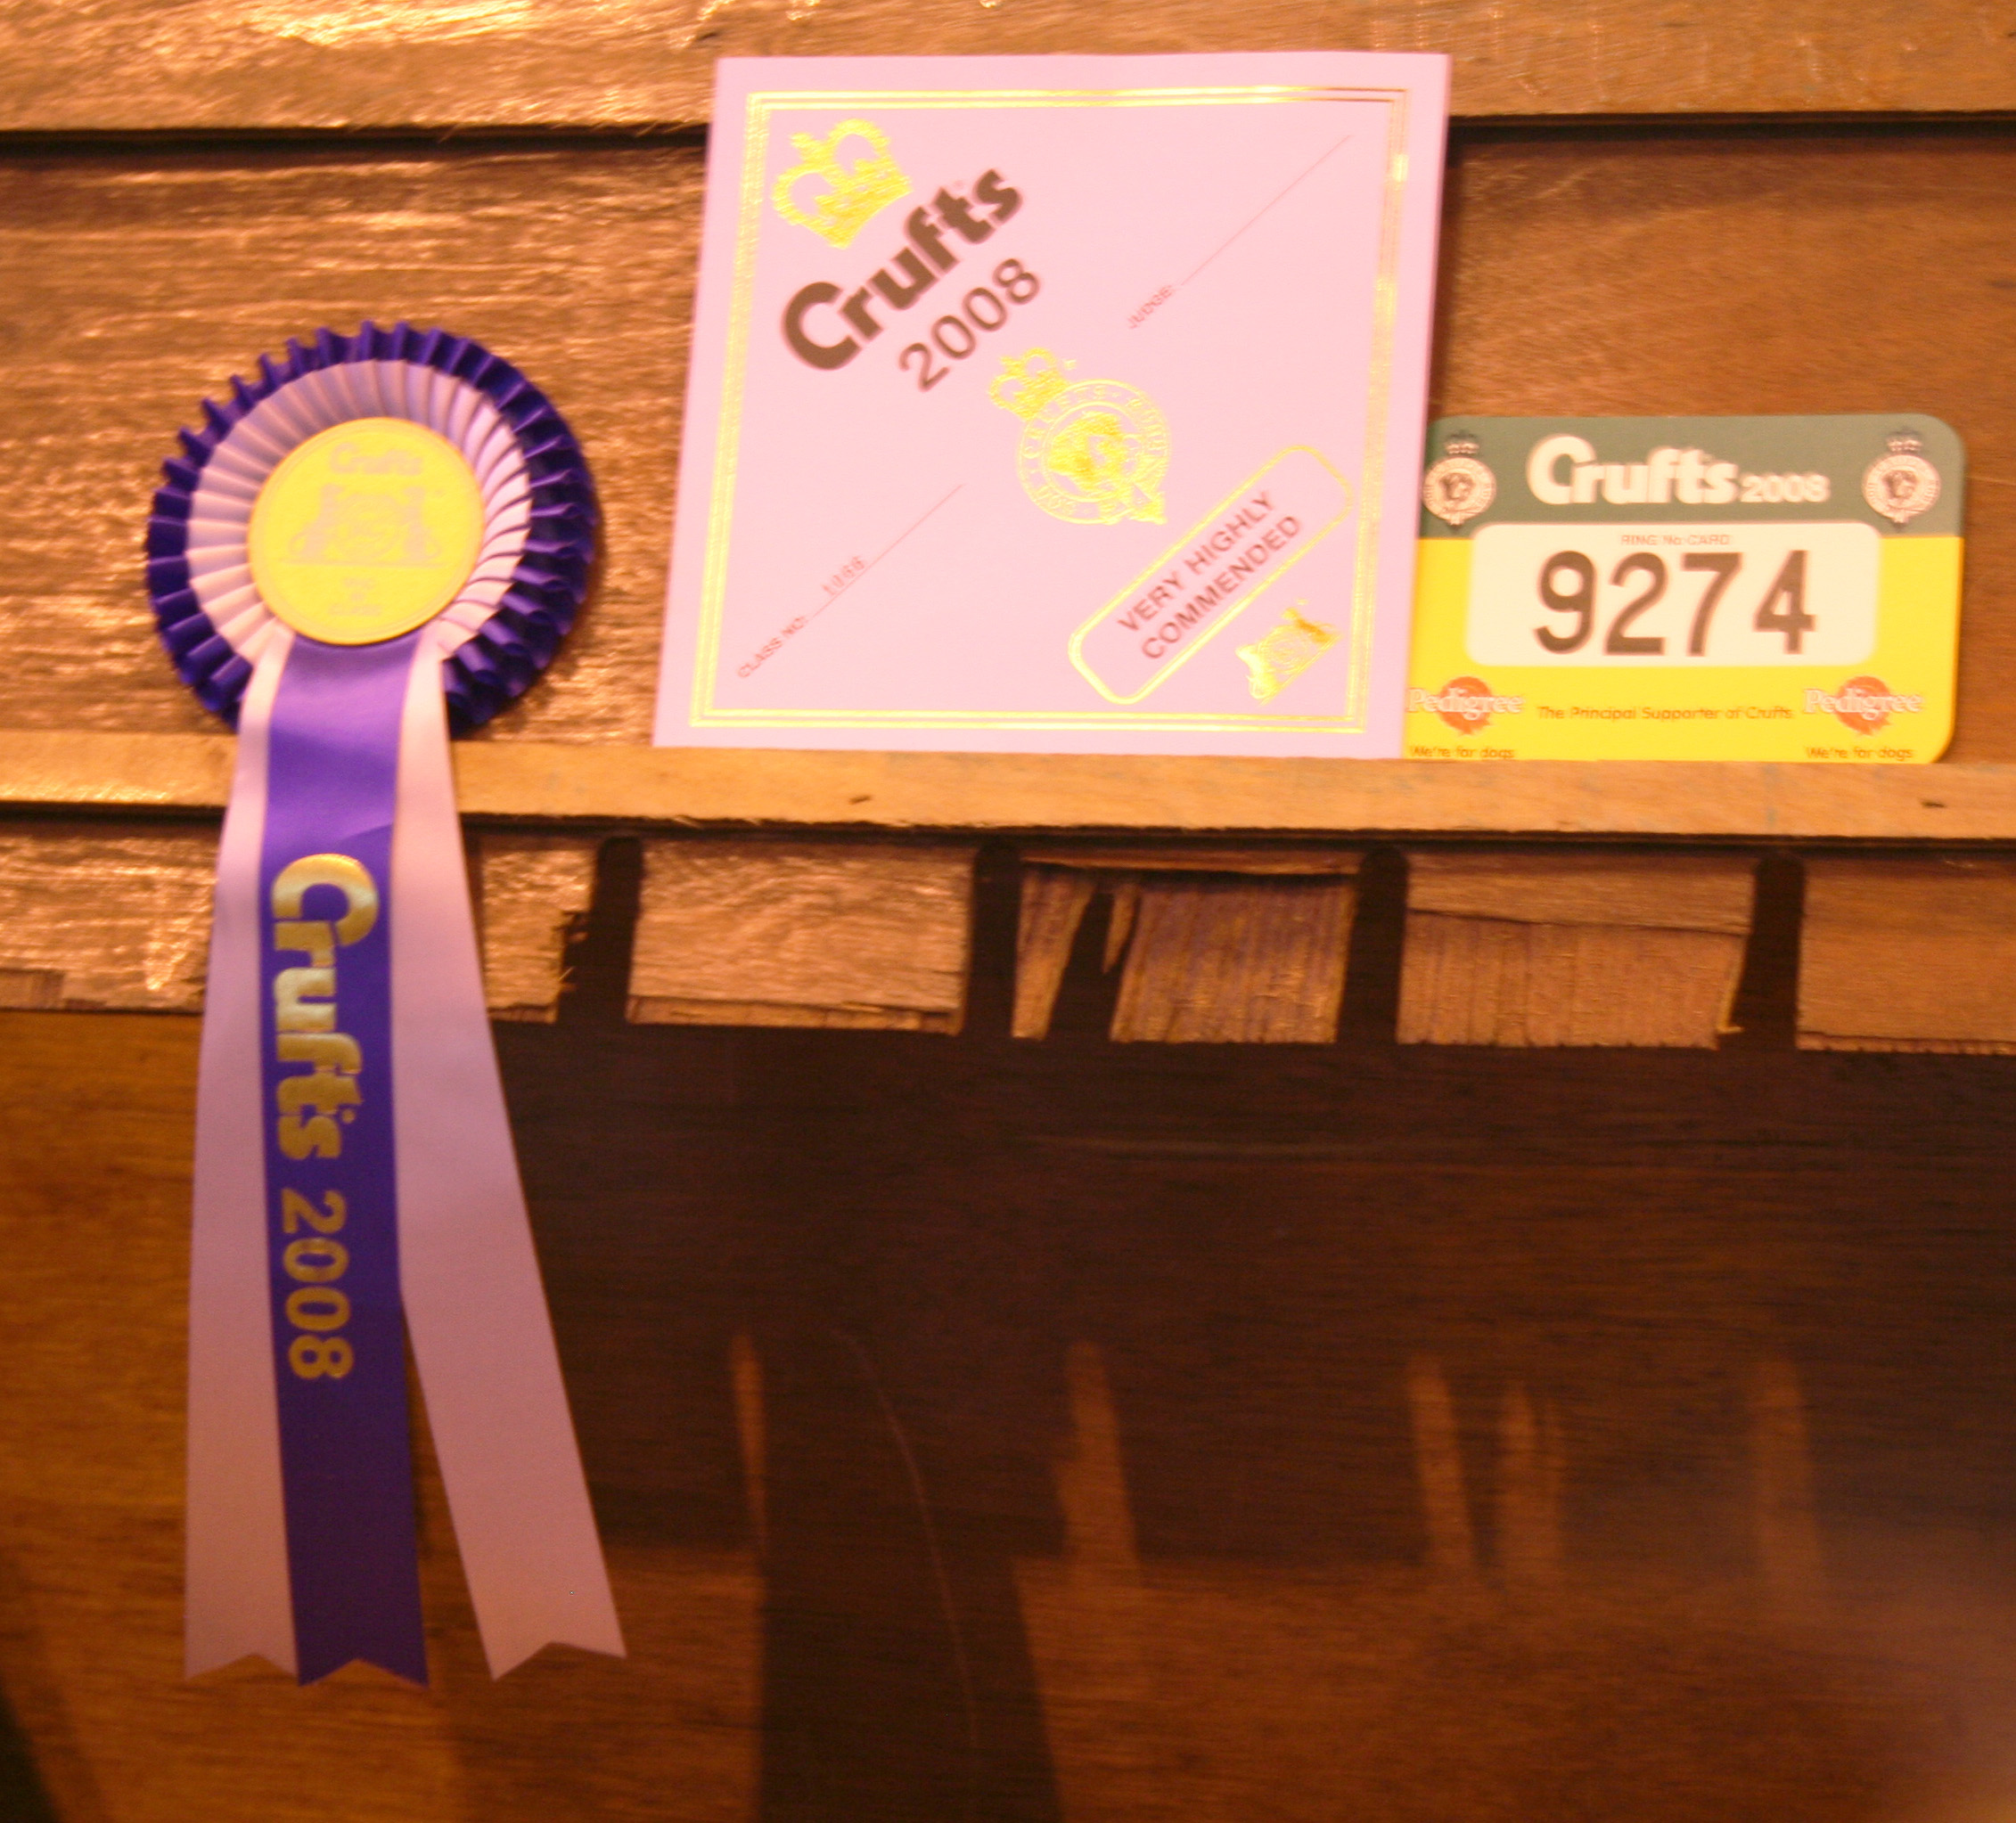 Holly's rosette from Crufts